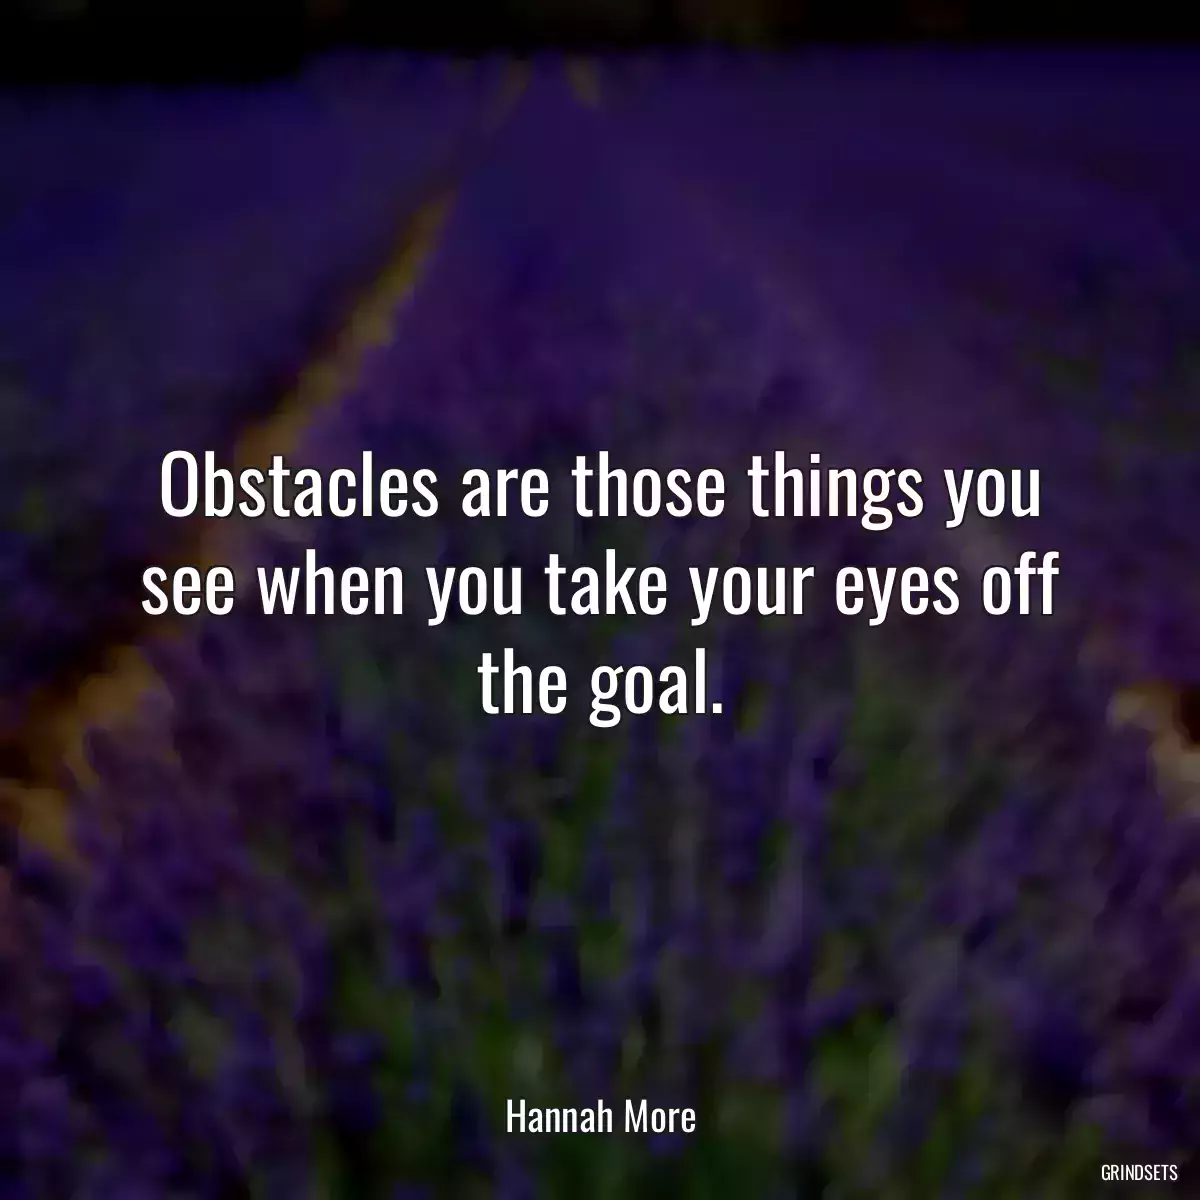 Obstacles are those things you see when you take your eyes off the goal.